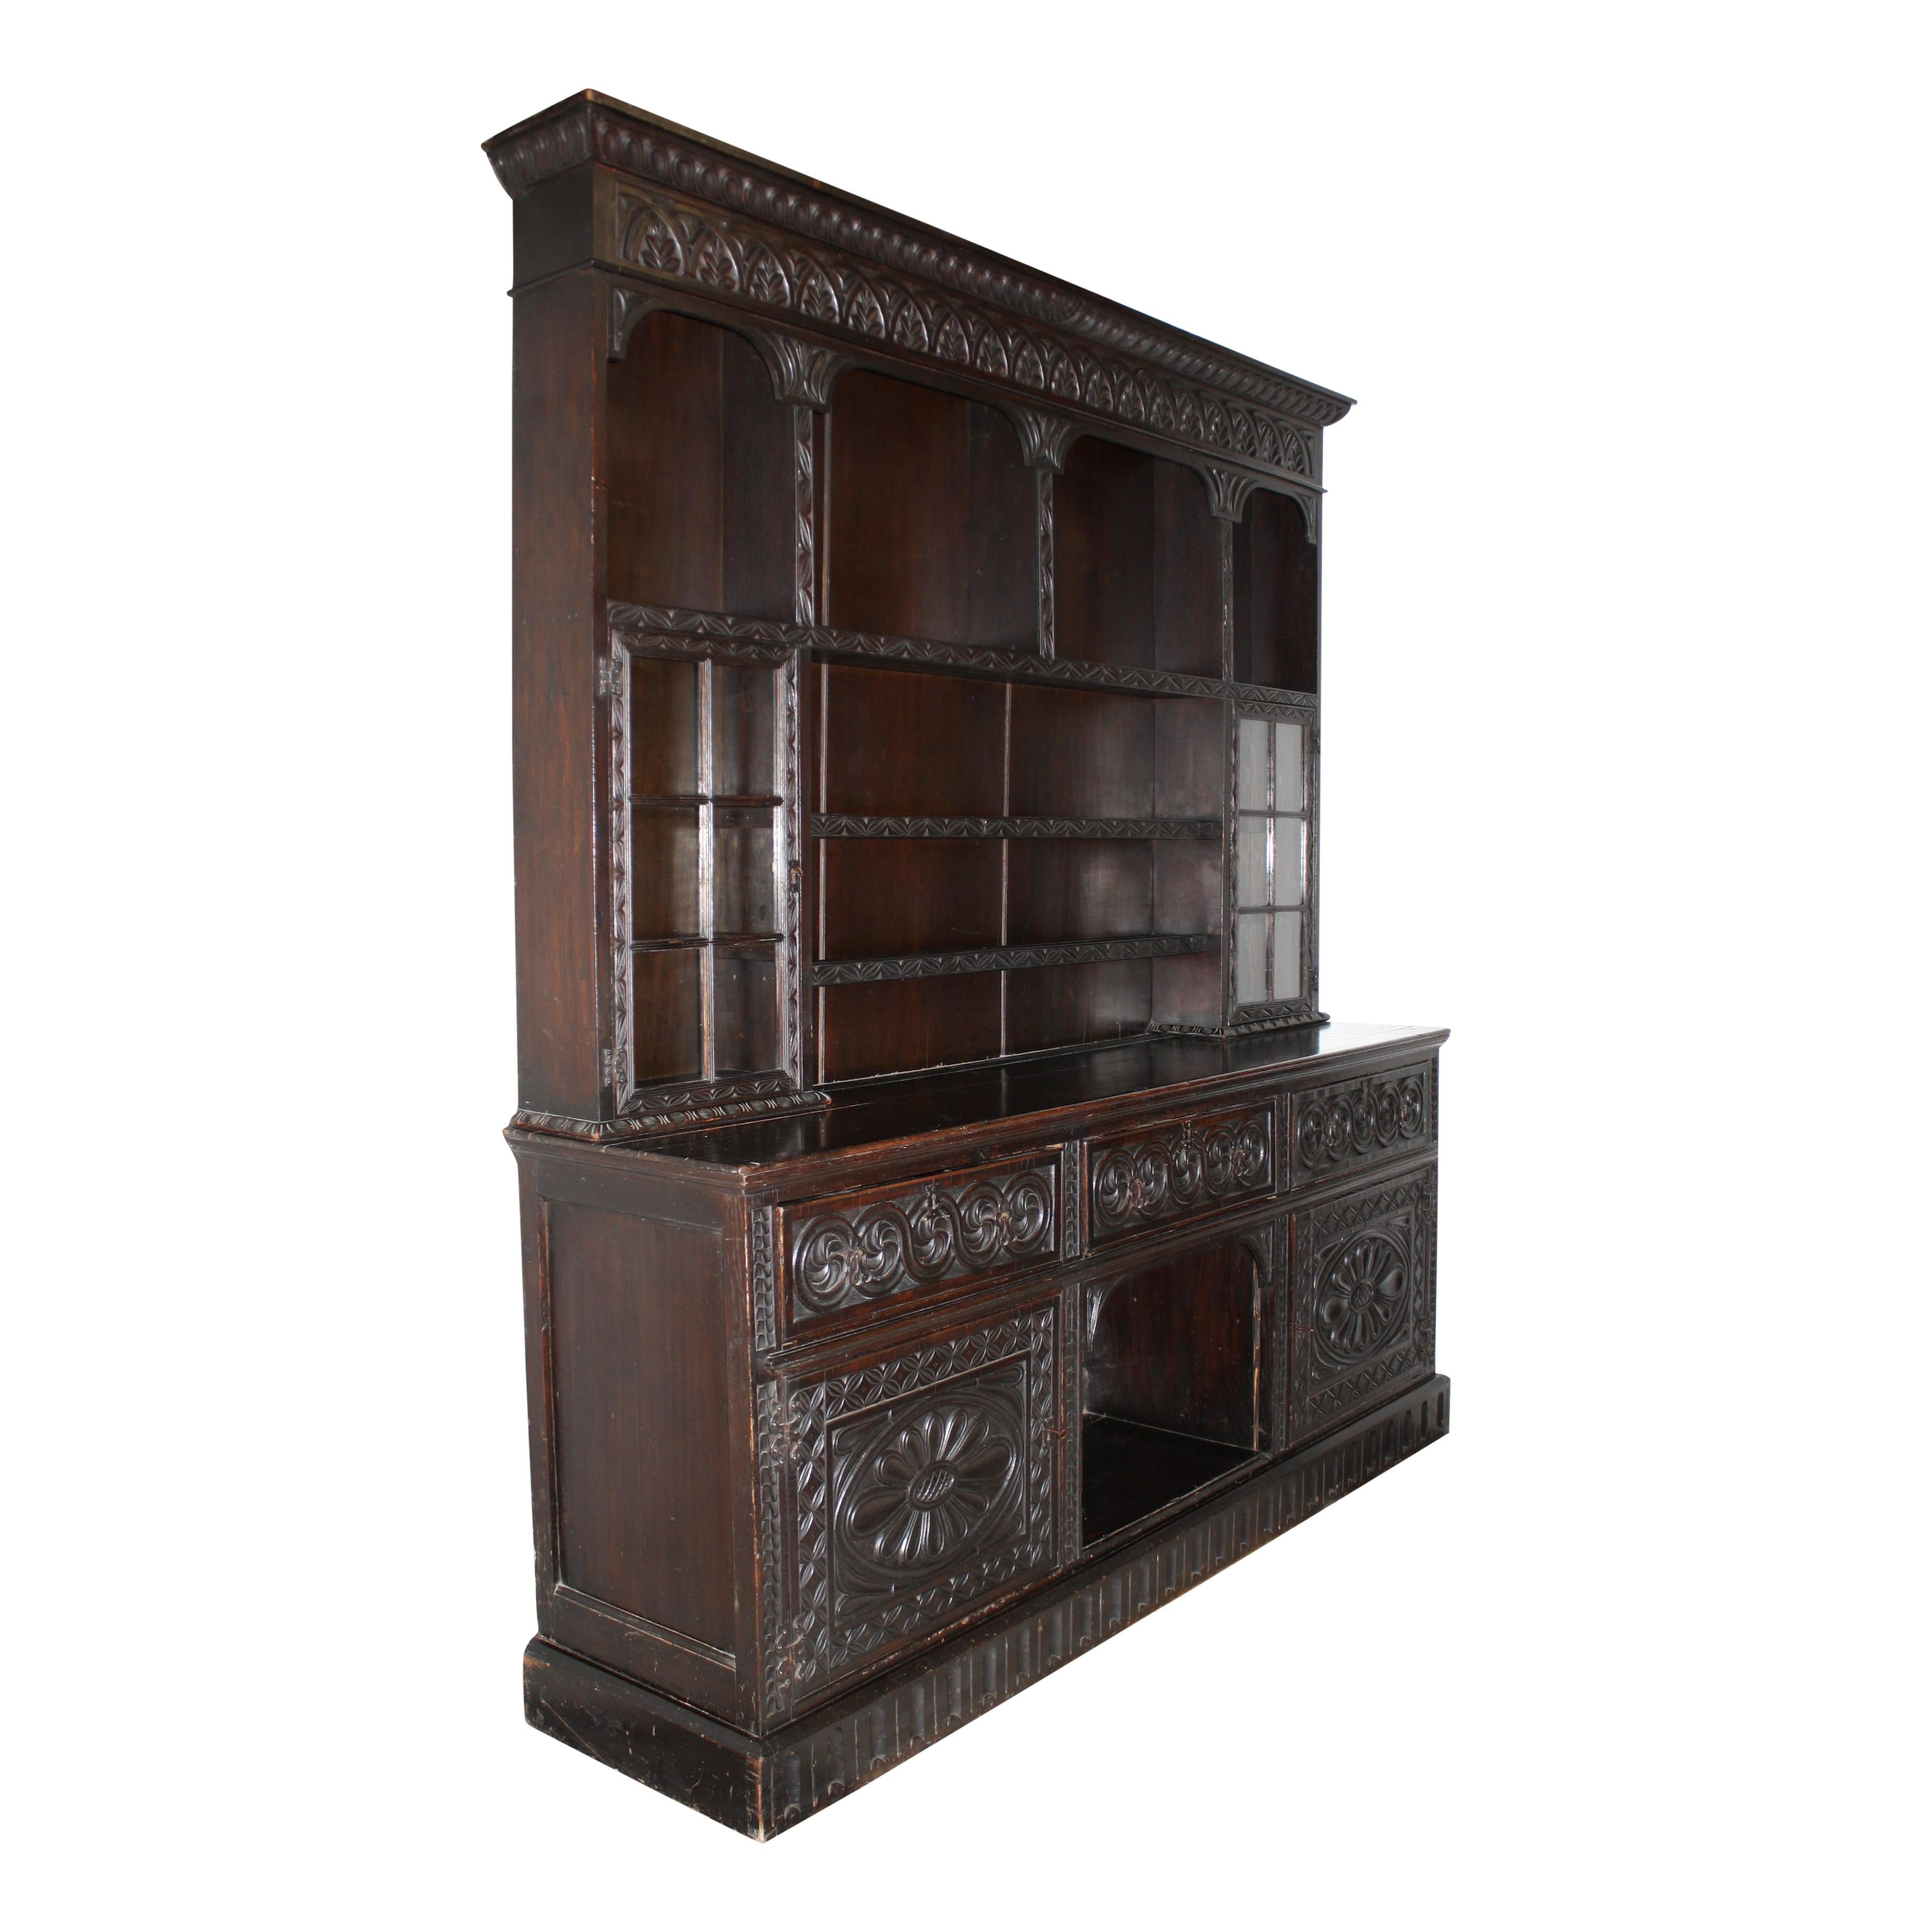 Beautifully carved and of substantial size, this English cabinet is comprised of a lower piece manufactured by James Phillips & Sons of Bristol in the early 20th century and a top hutch, which was masterfully added by Edwards & Roberts of London.